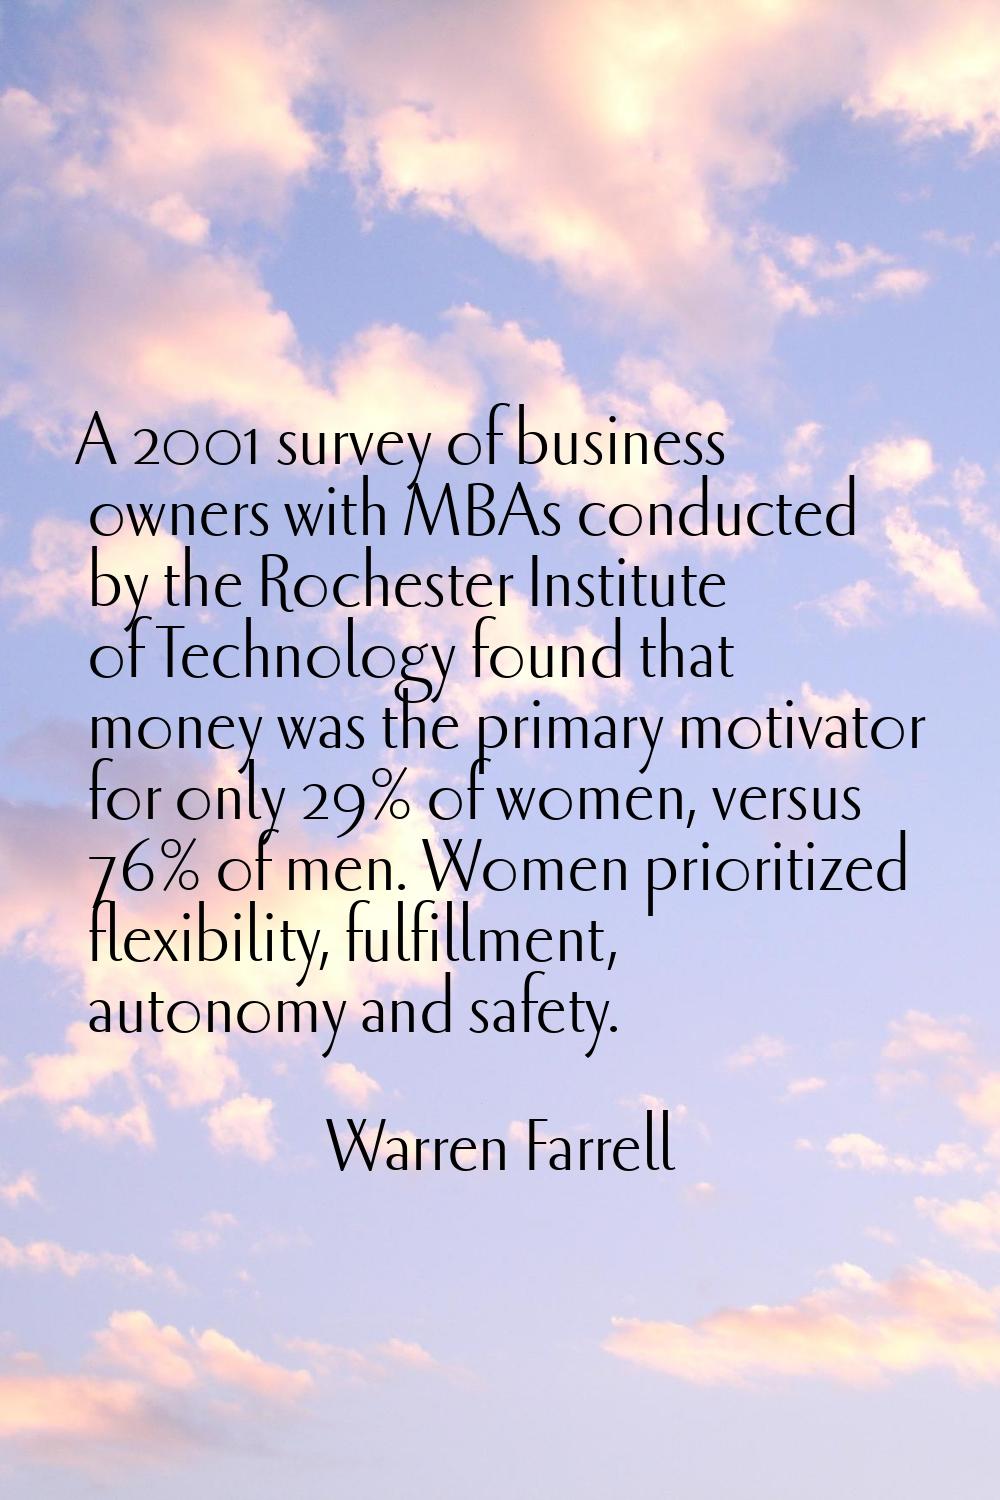 A 2001 survey of business owners with MBAs conducted by the Rochester Institute of Technology found